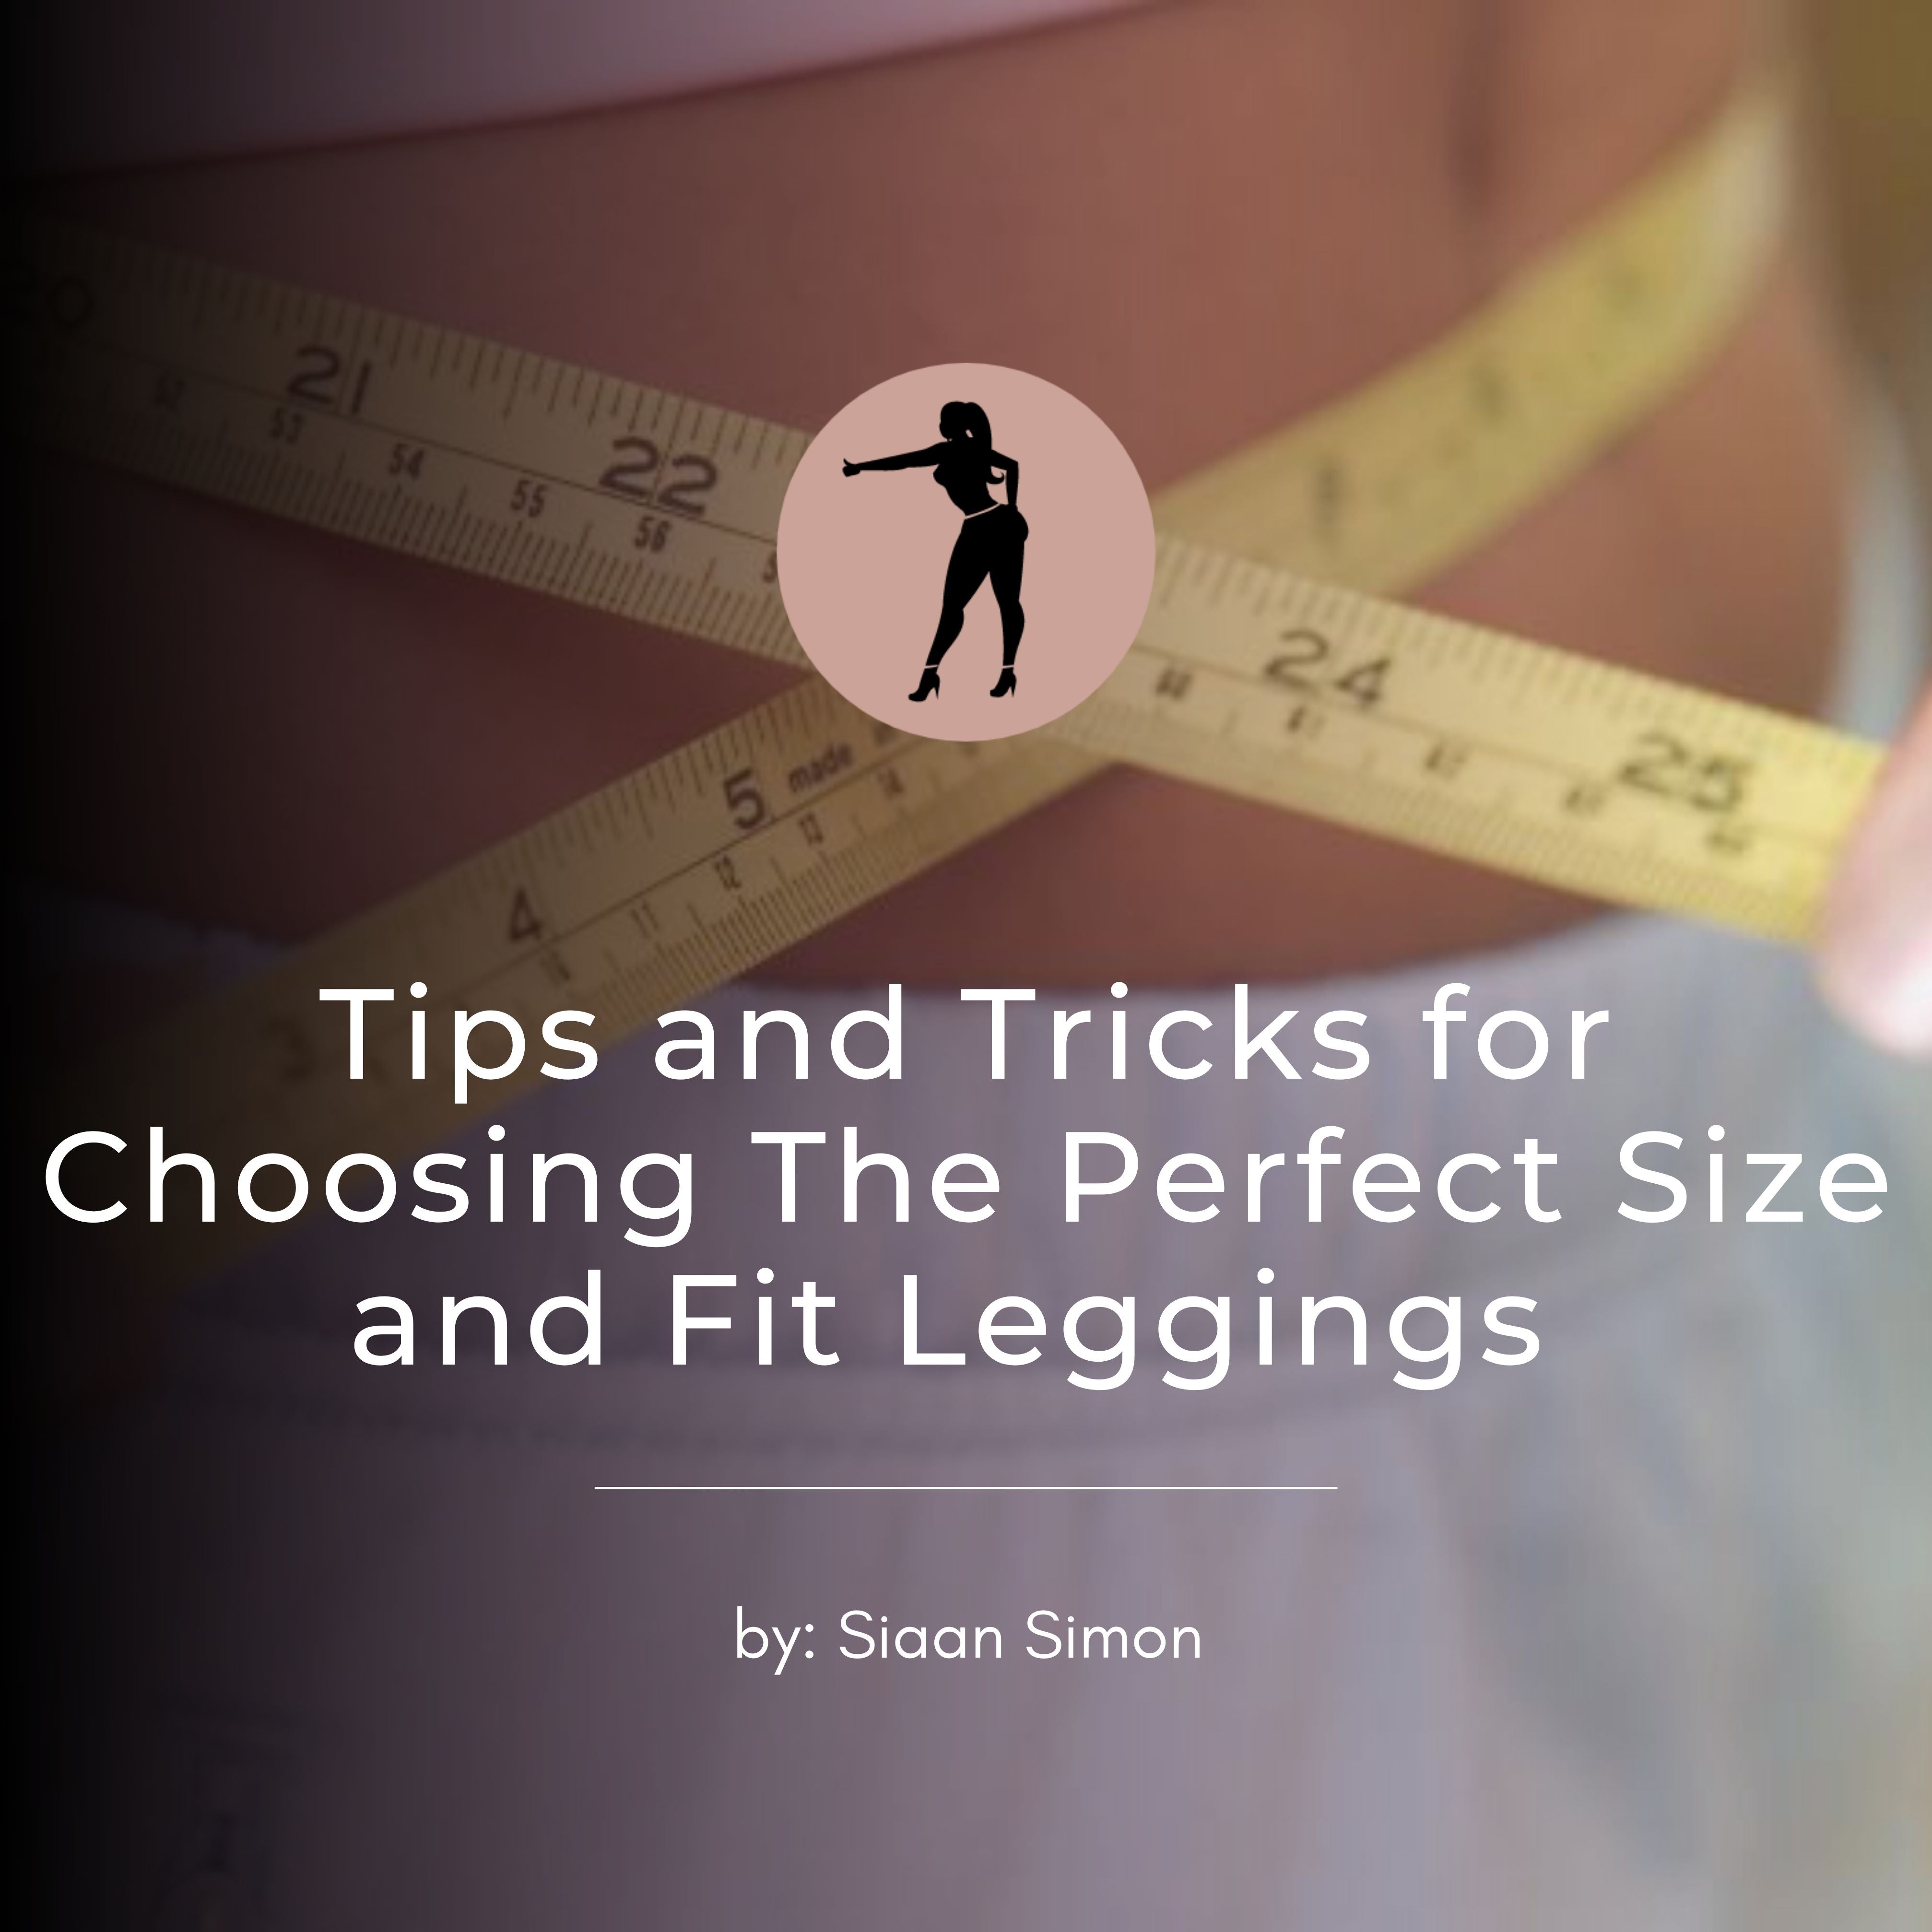 Tips and Tricks for Choosing The Perfect Size and Fit Leggings